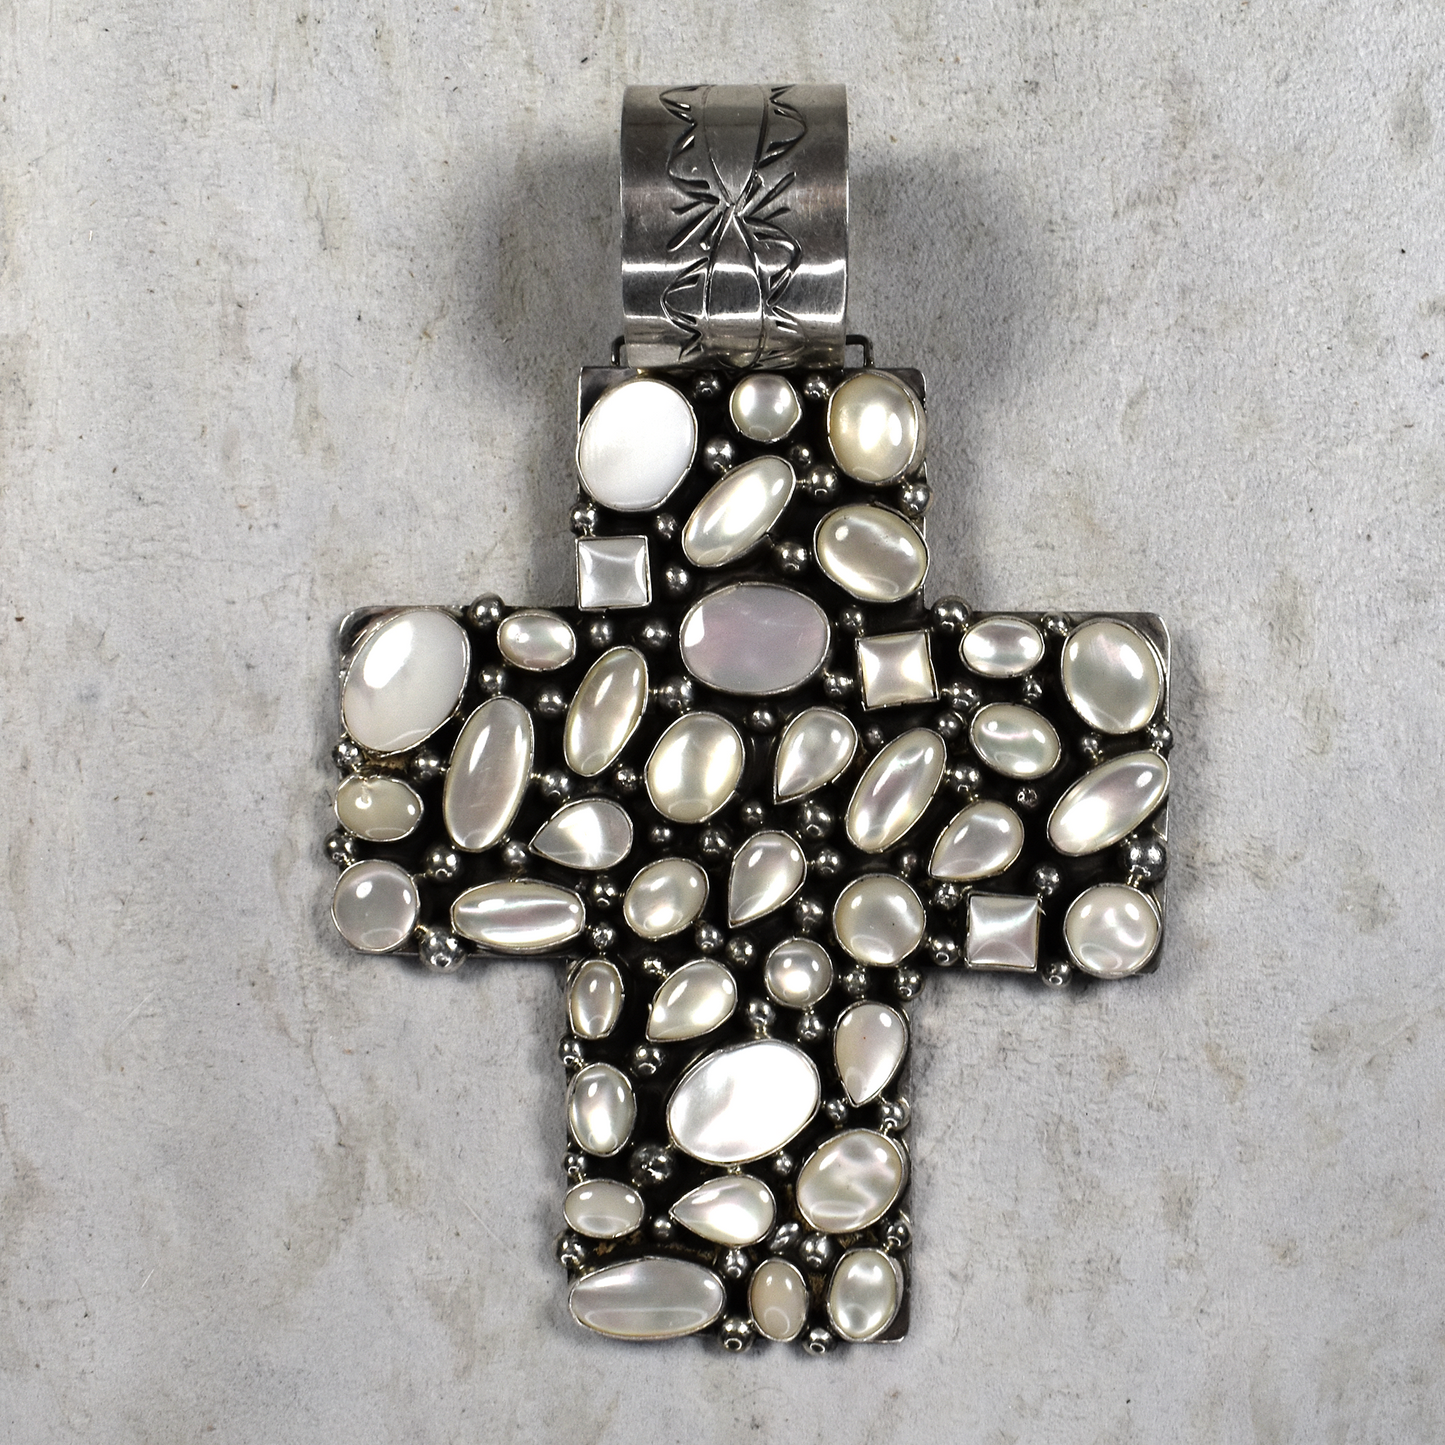 Large Square Cross Pendant with Mother of Pearl Inlay by Rocki Gorman